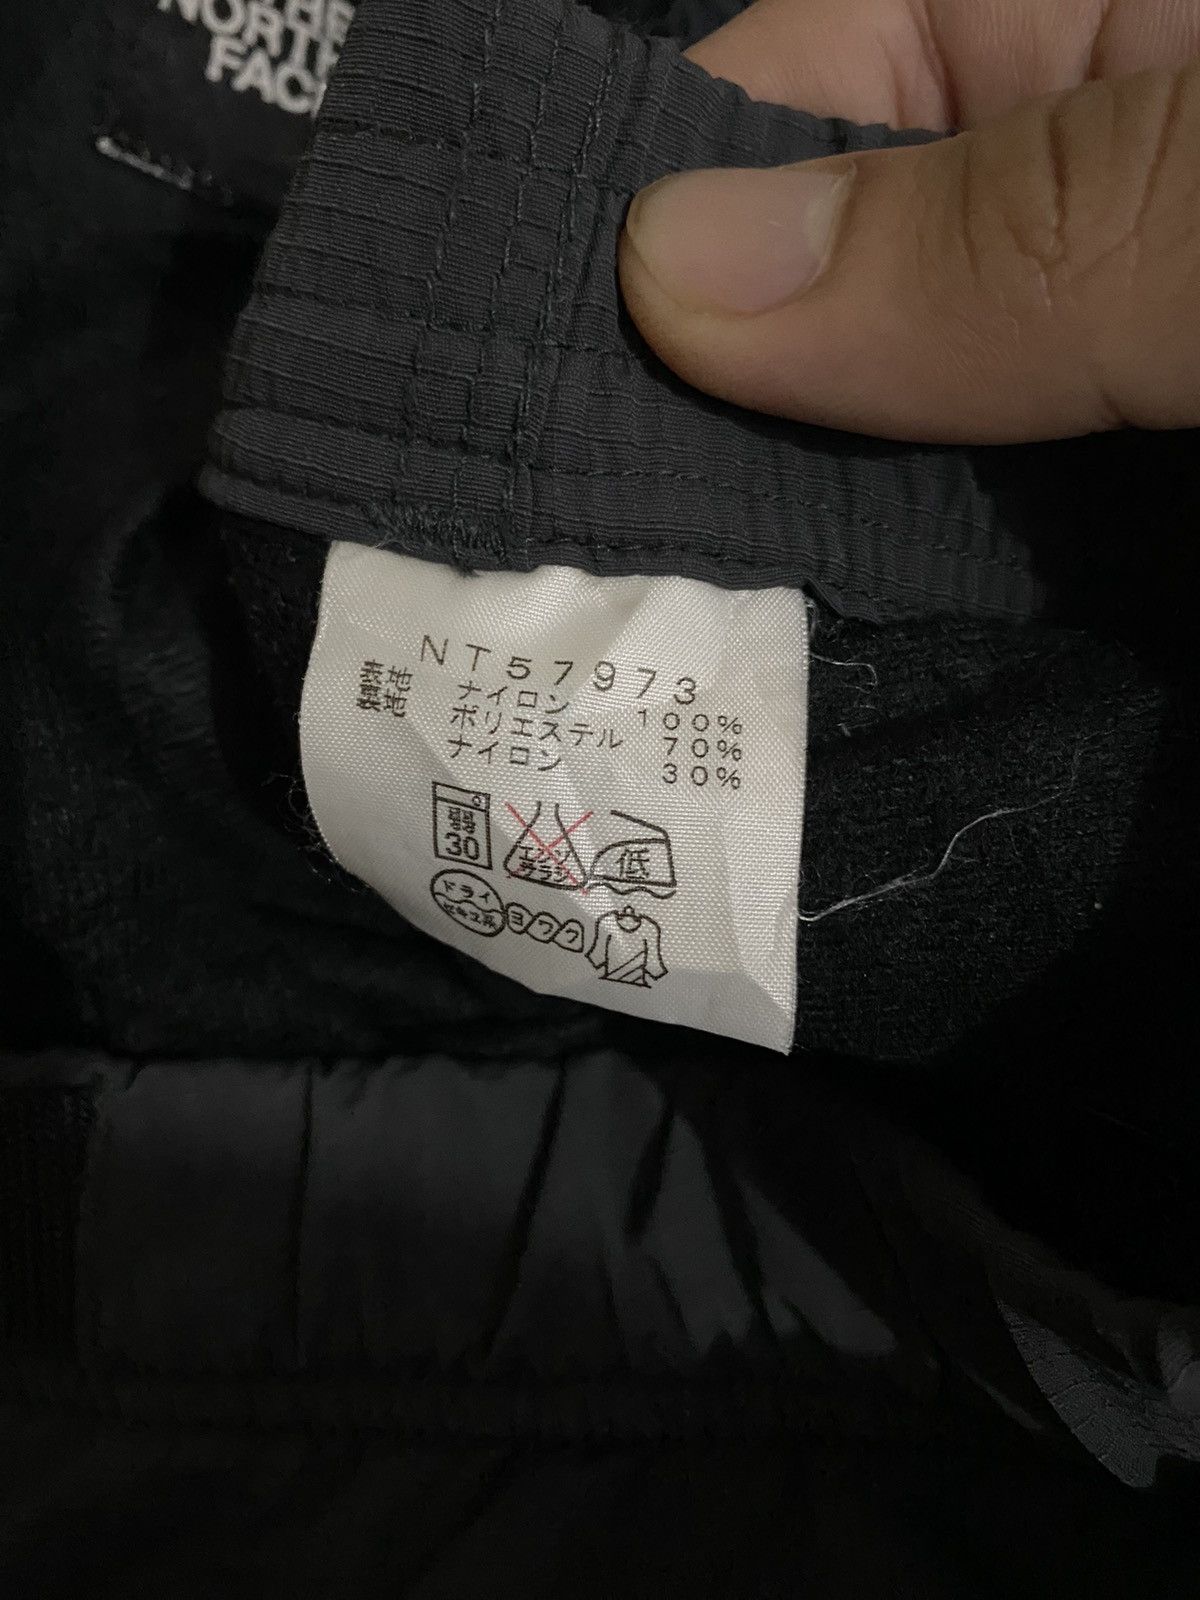 The North Face NT57973 Outdoor 6 Cargo Pants - 9